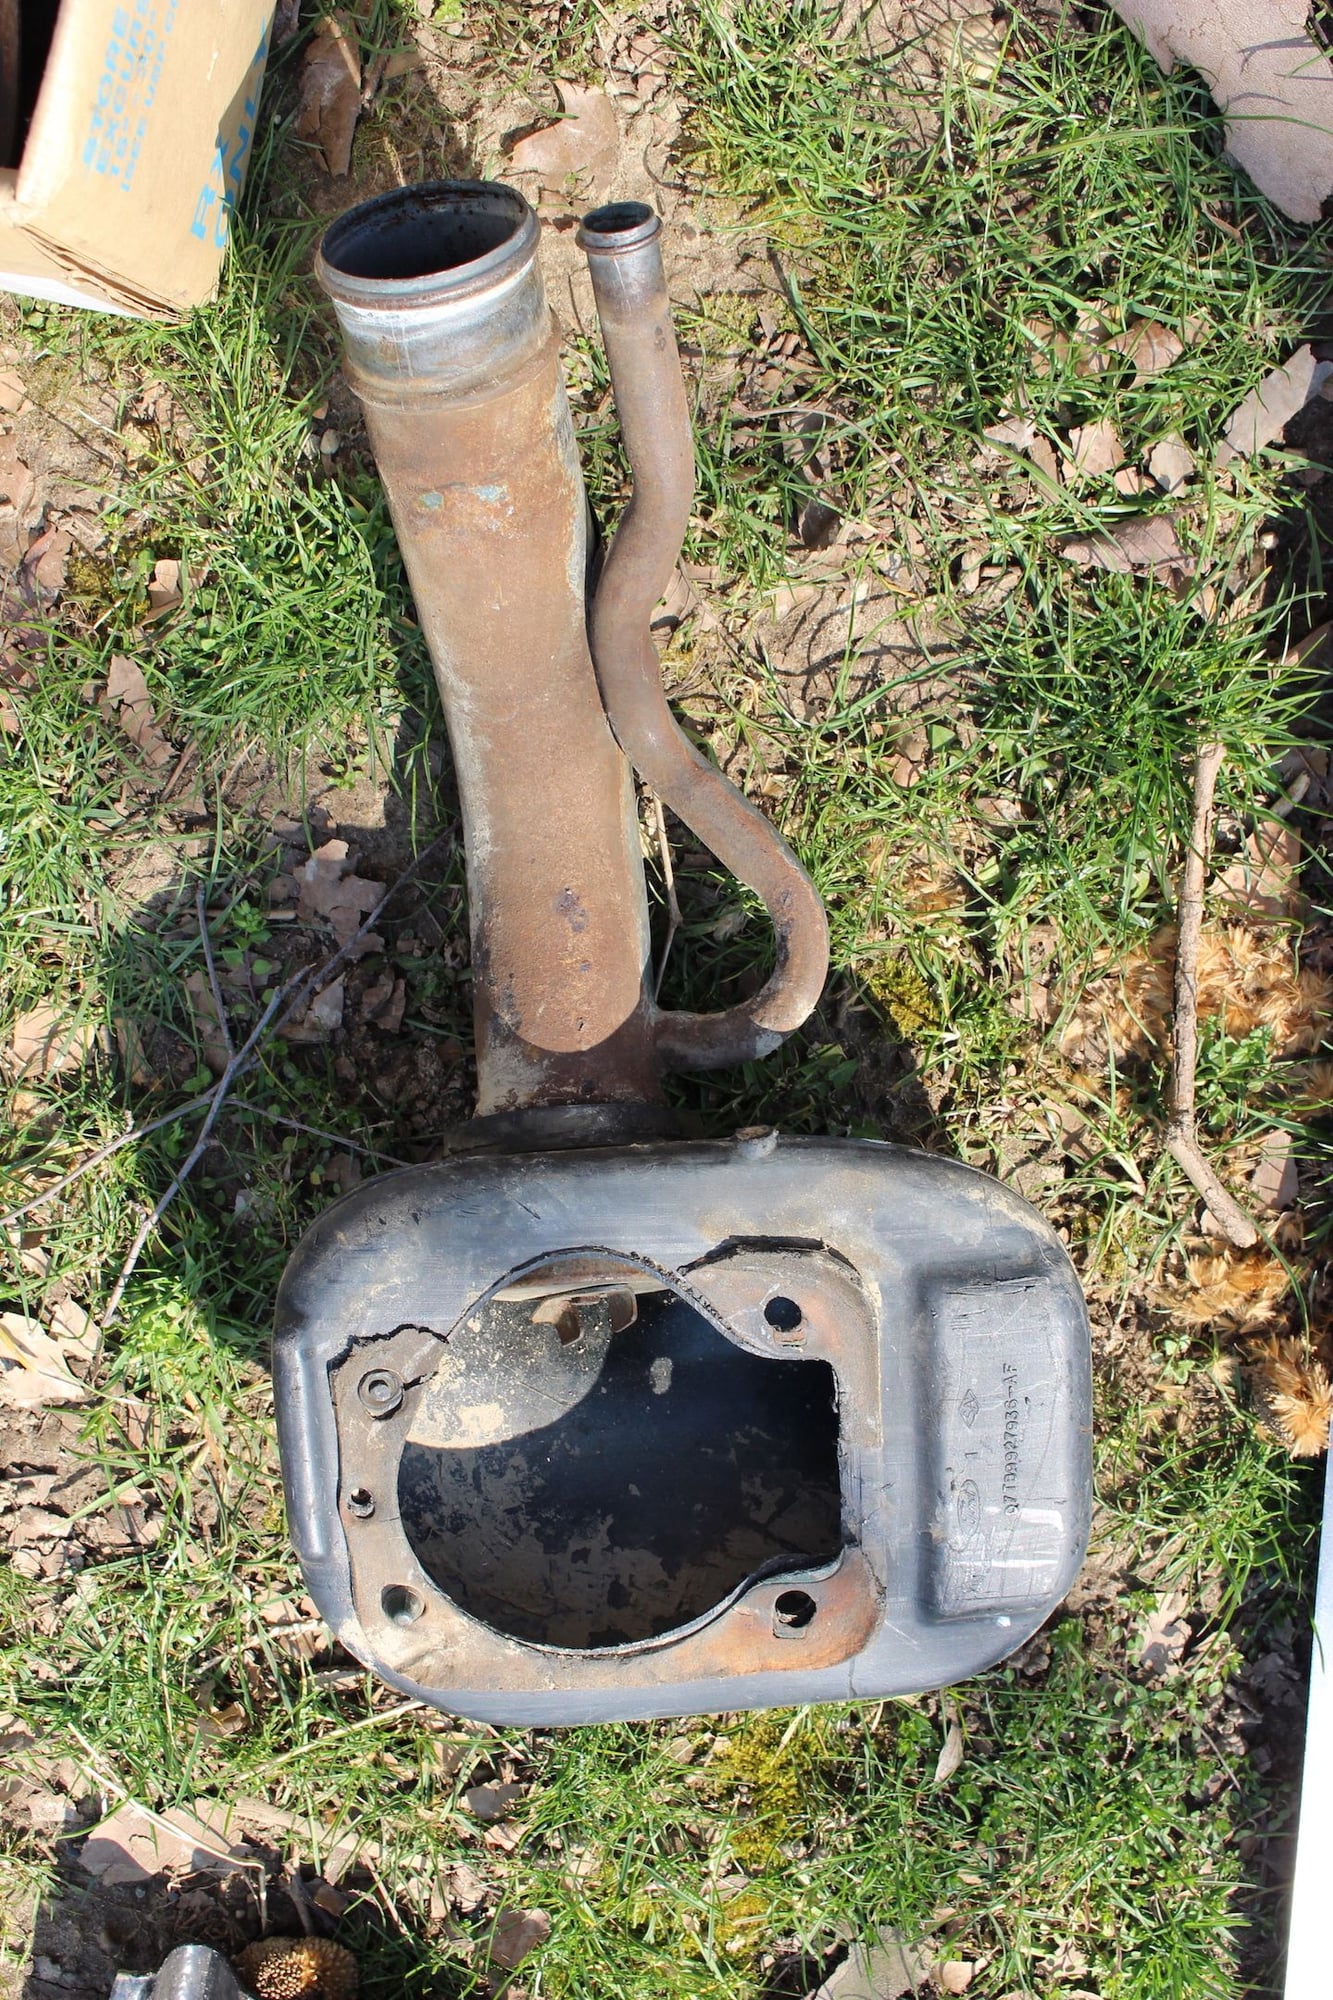 Miscellaneous - 73-79 Truck parts - Used - 1973 to 1979 Ford F Series - Avon, IN 46123, United States